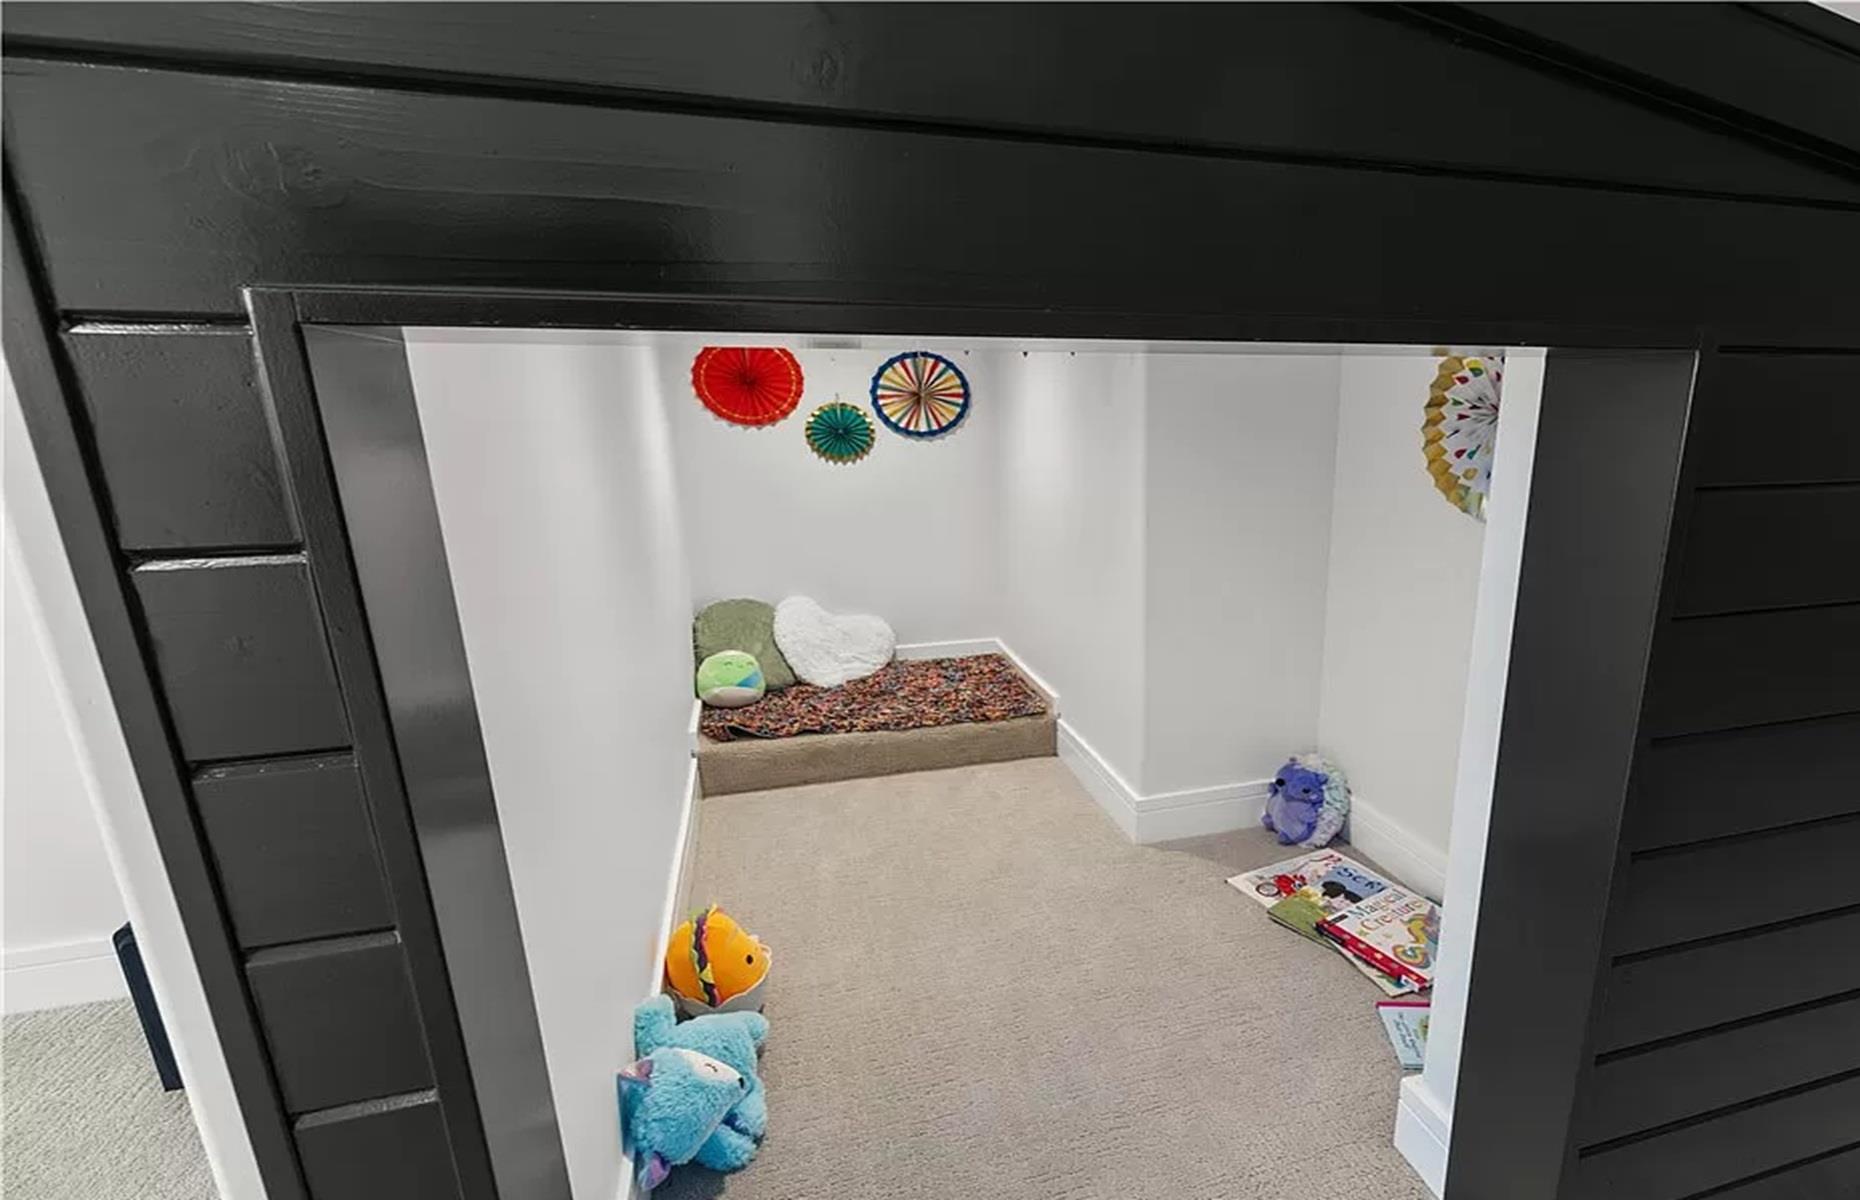 <p>Head through the door and you'll find a secretive storage room, complete with the ultimate kid's play den. The space boasts a cute faux house, where the owners' children no doubt spent a lot of time playing their favorite games.</p>